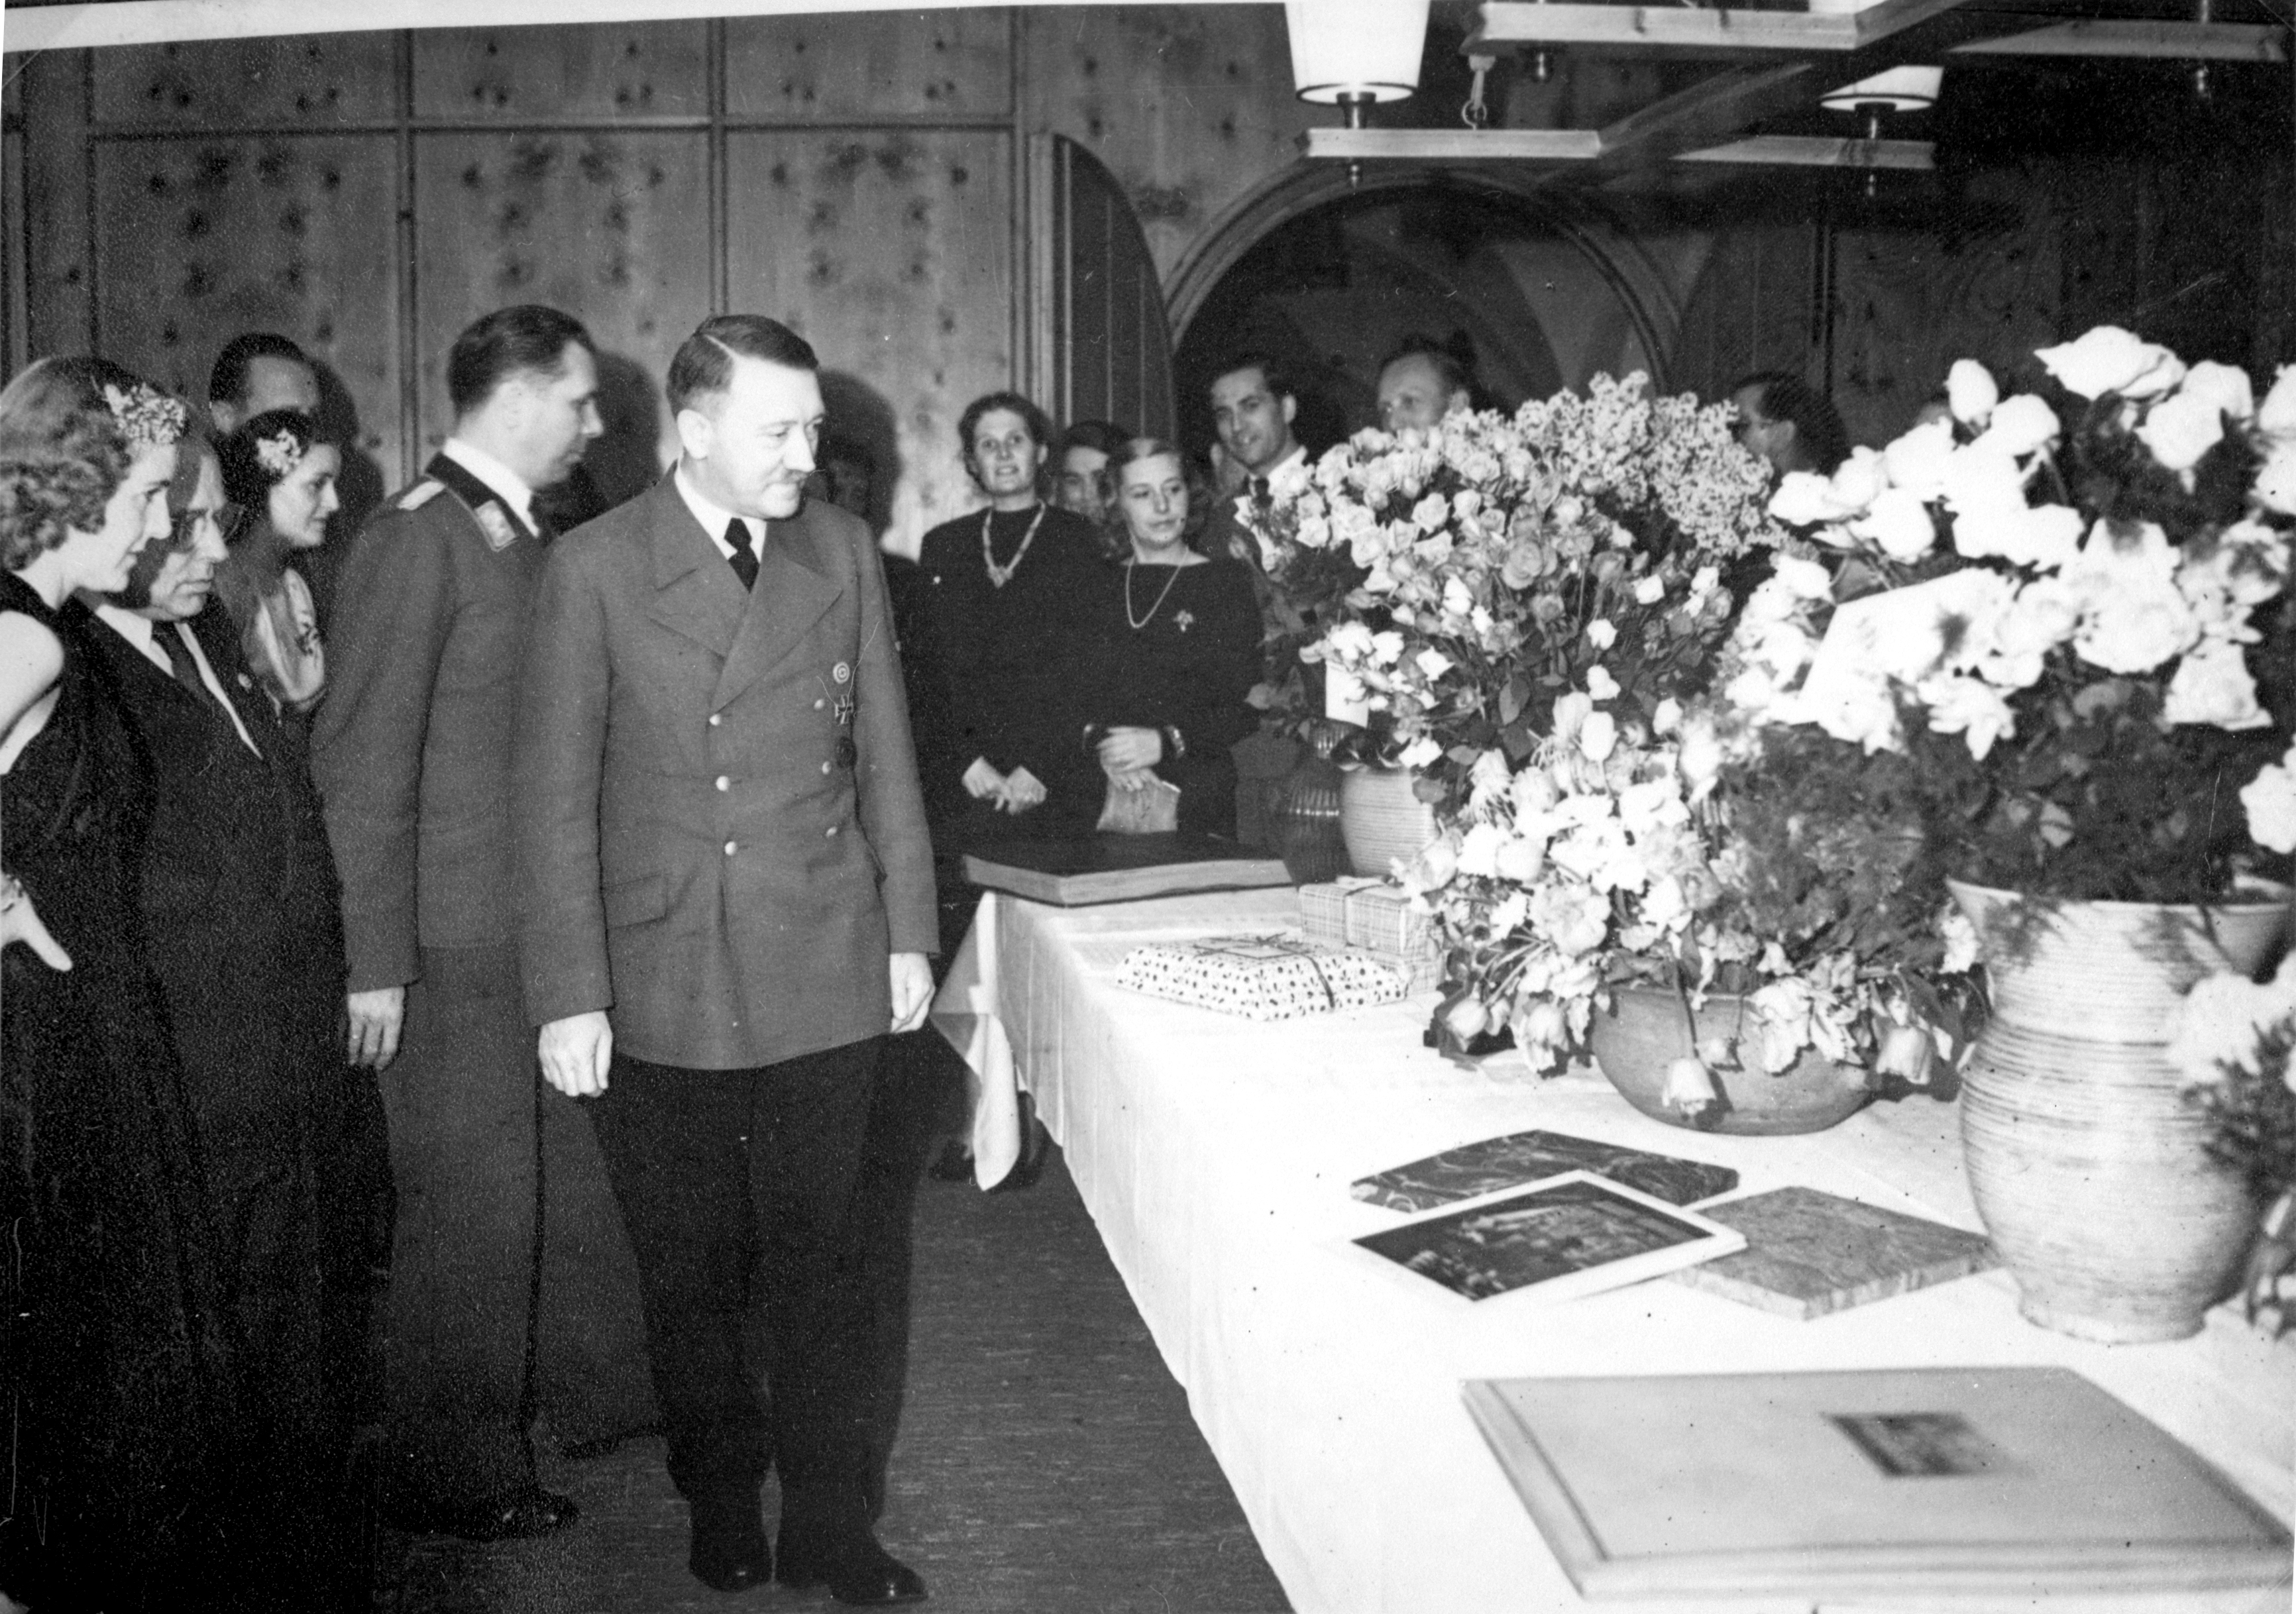 Adolf Hitler and Eva Braun look at the gifts on the occasion of the 54th birthday of the Führer, from Eva Braun's albums